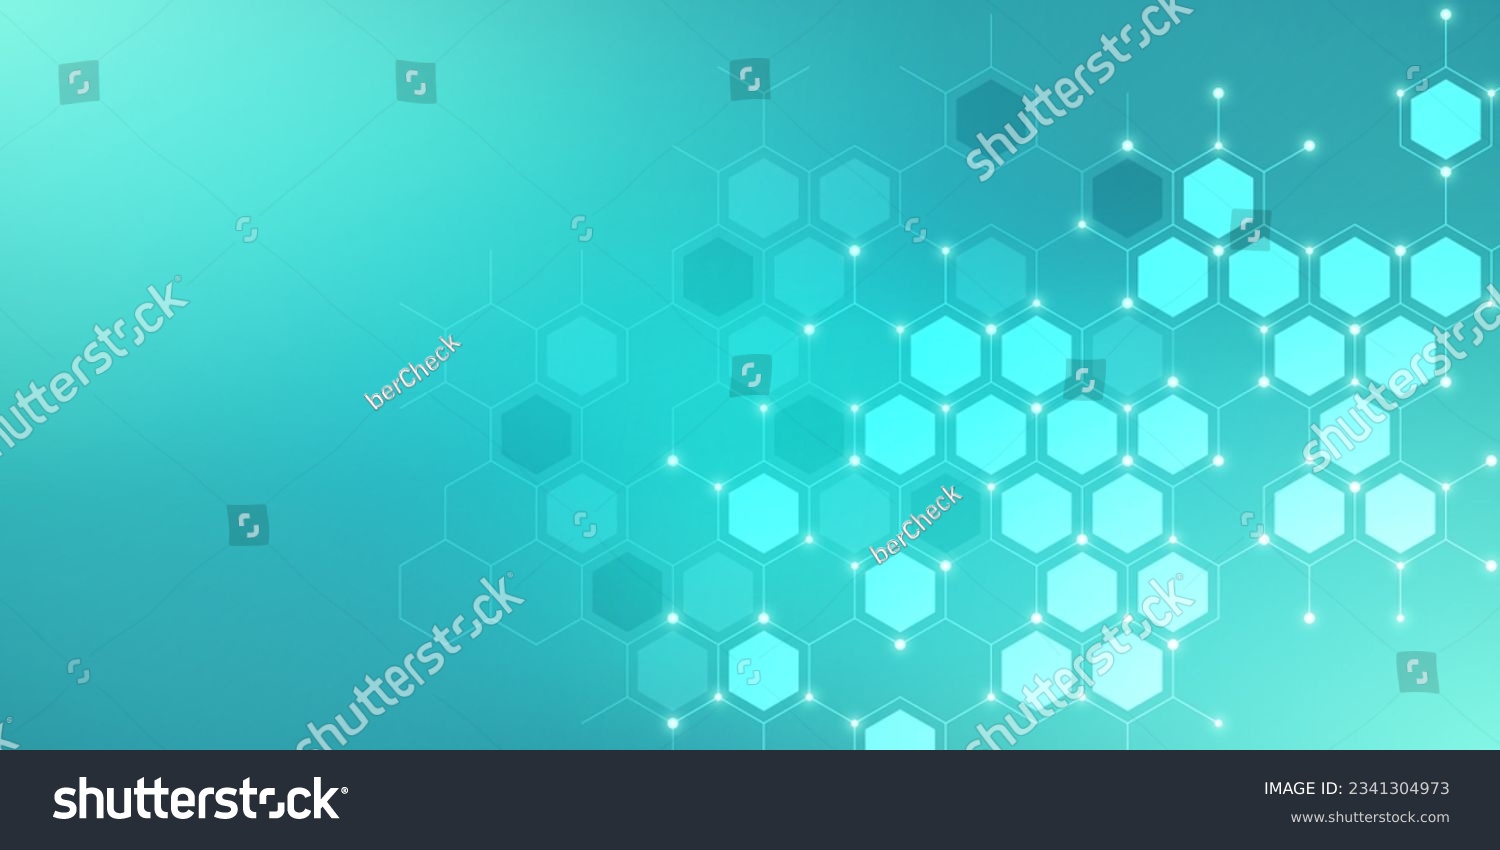 Abstract design element with geometric background of hexagons shape pattern. Vector illustration #2341304973